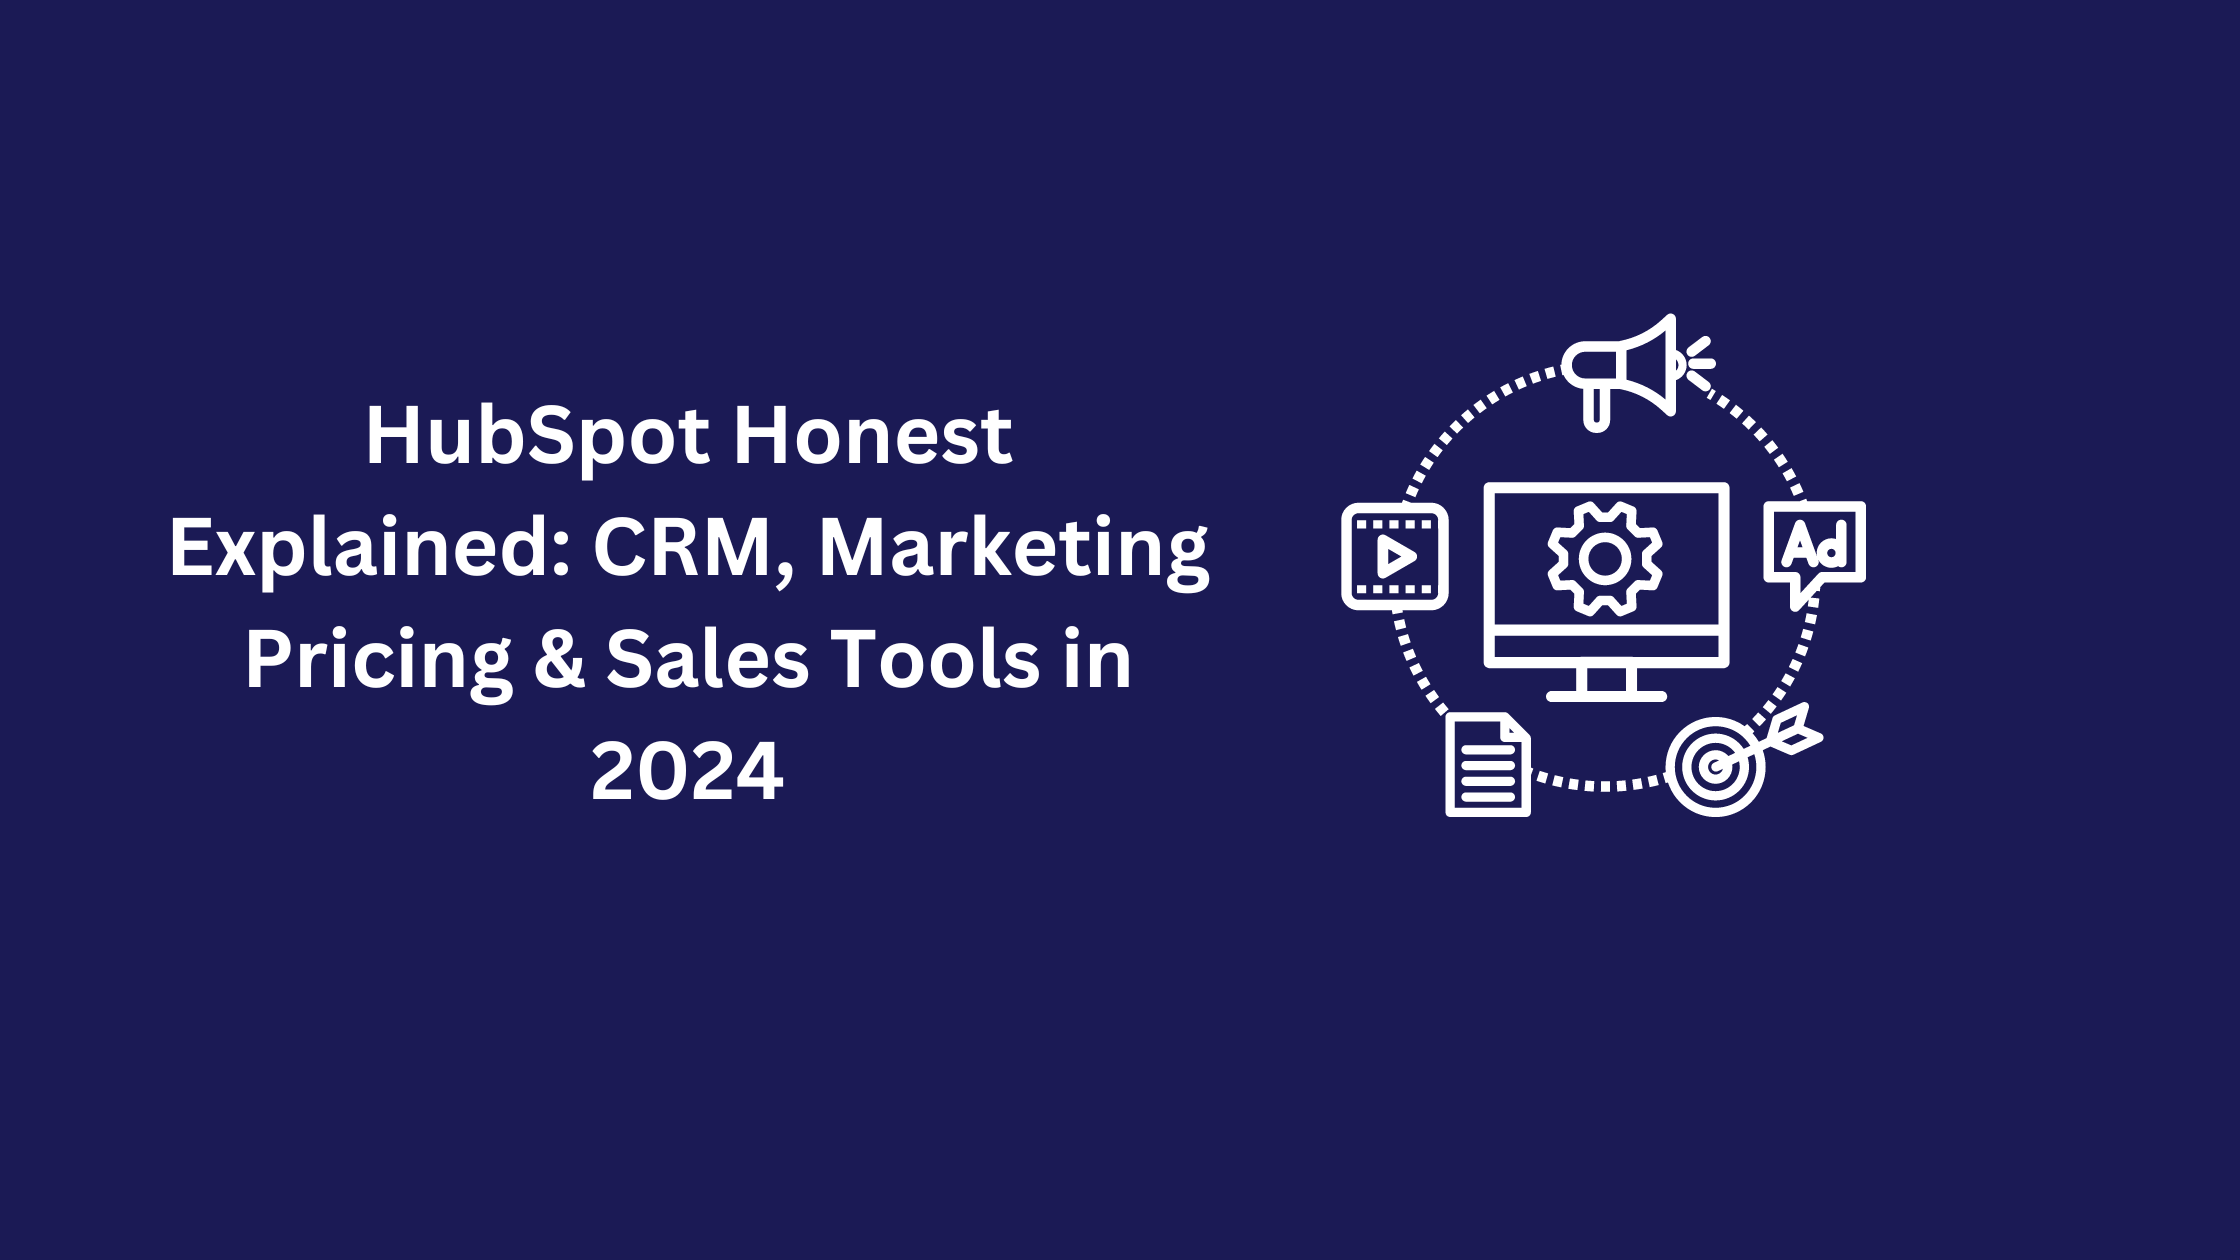 HubSpot Honest Explained: CRM, Marketing Pricing & Sales Tools in 2024